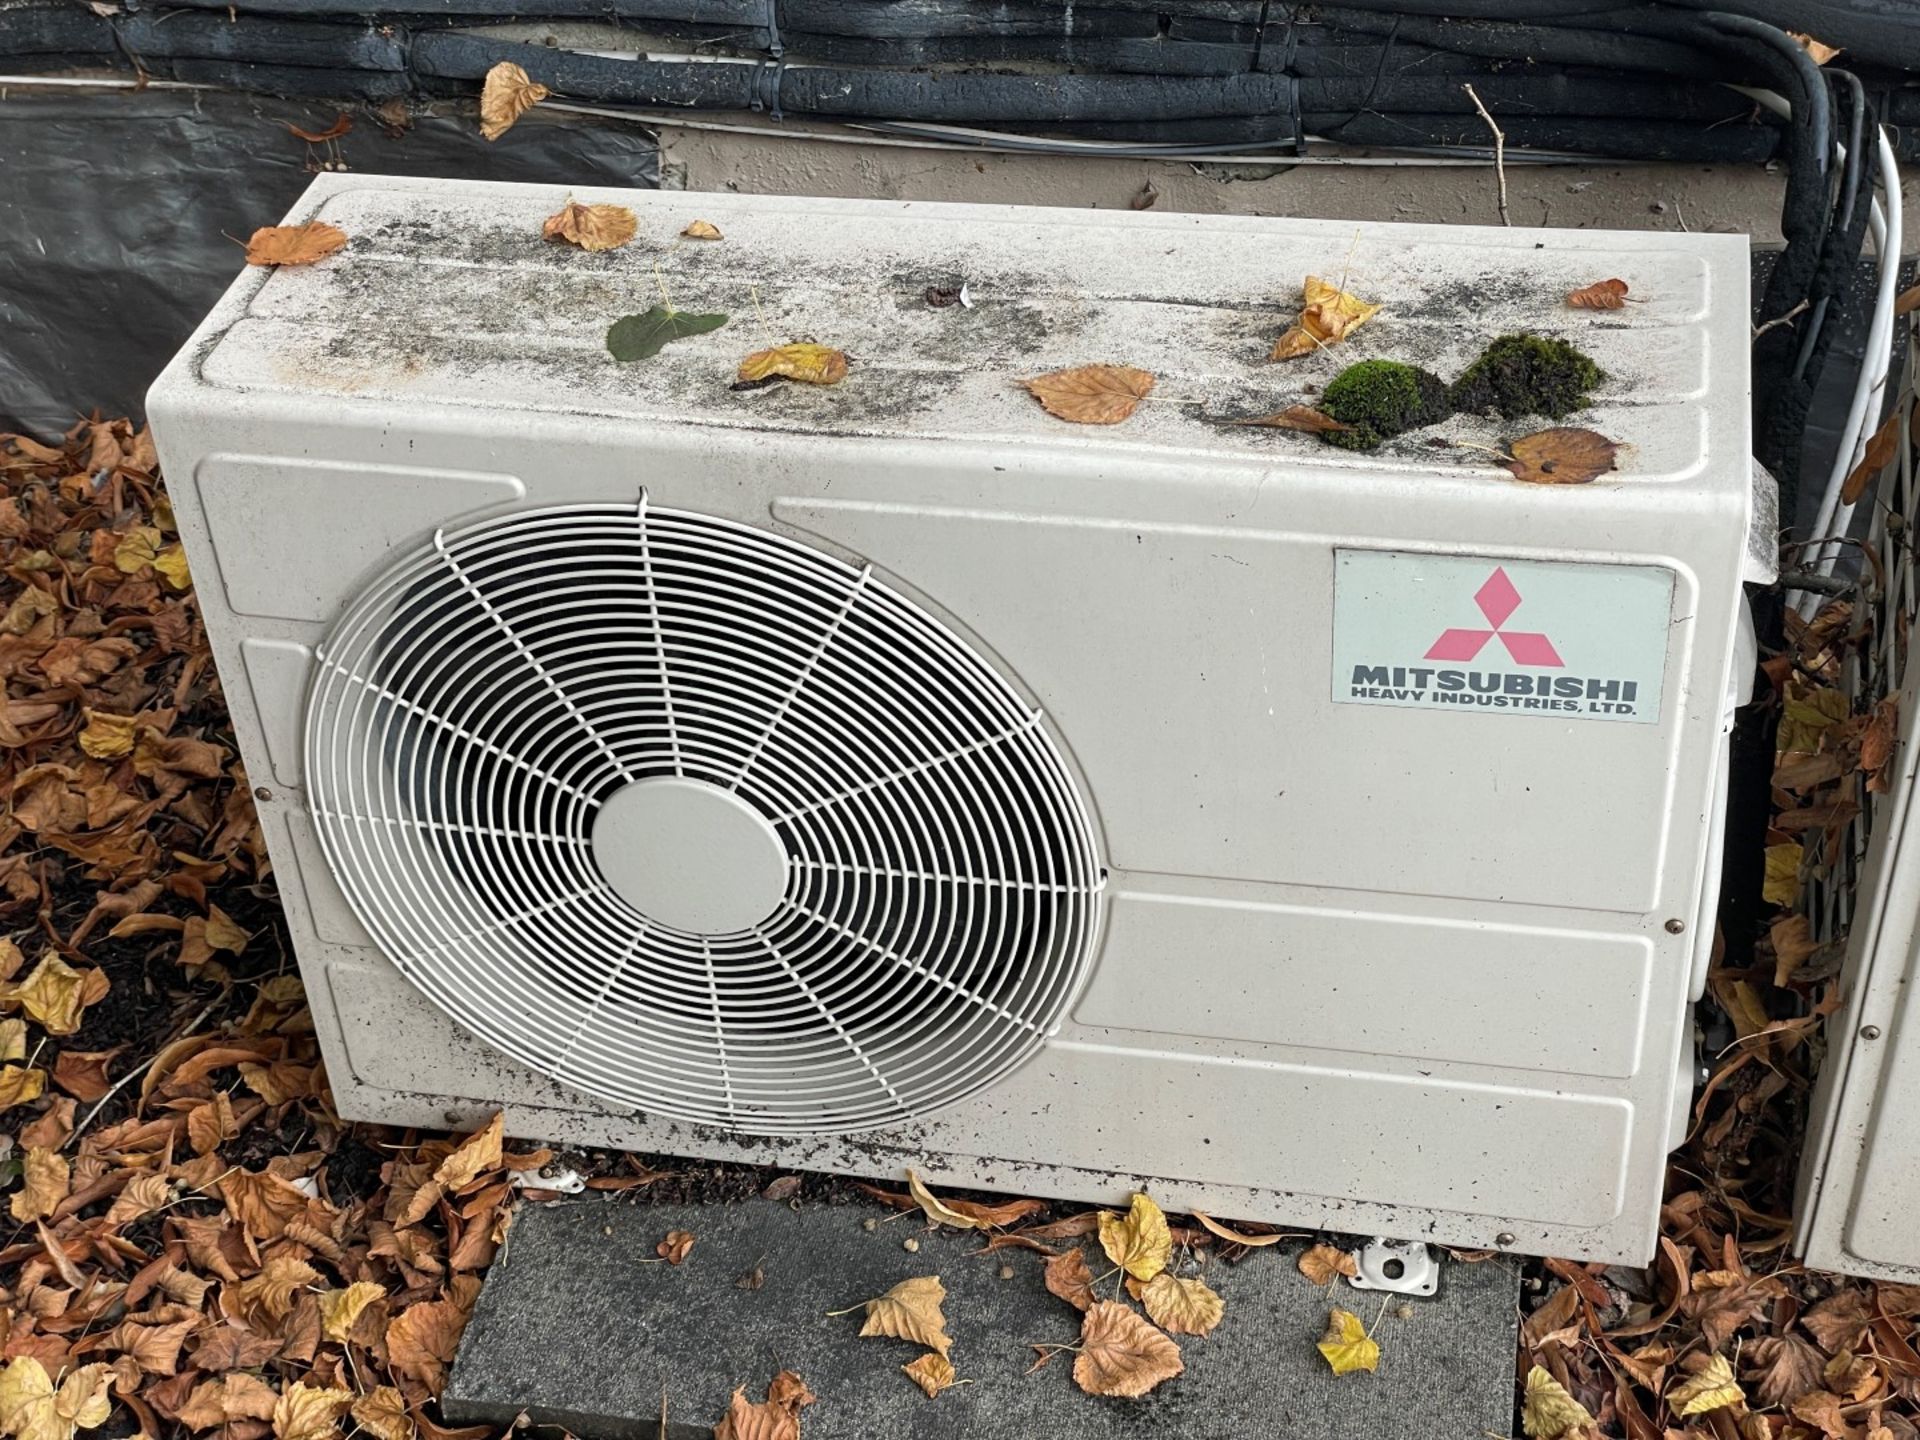 1 x Mitsubishi Split Type Air Conditioning Unit - Includes Indoor Unit and Outdoor Unit - Image 2 of 5